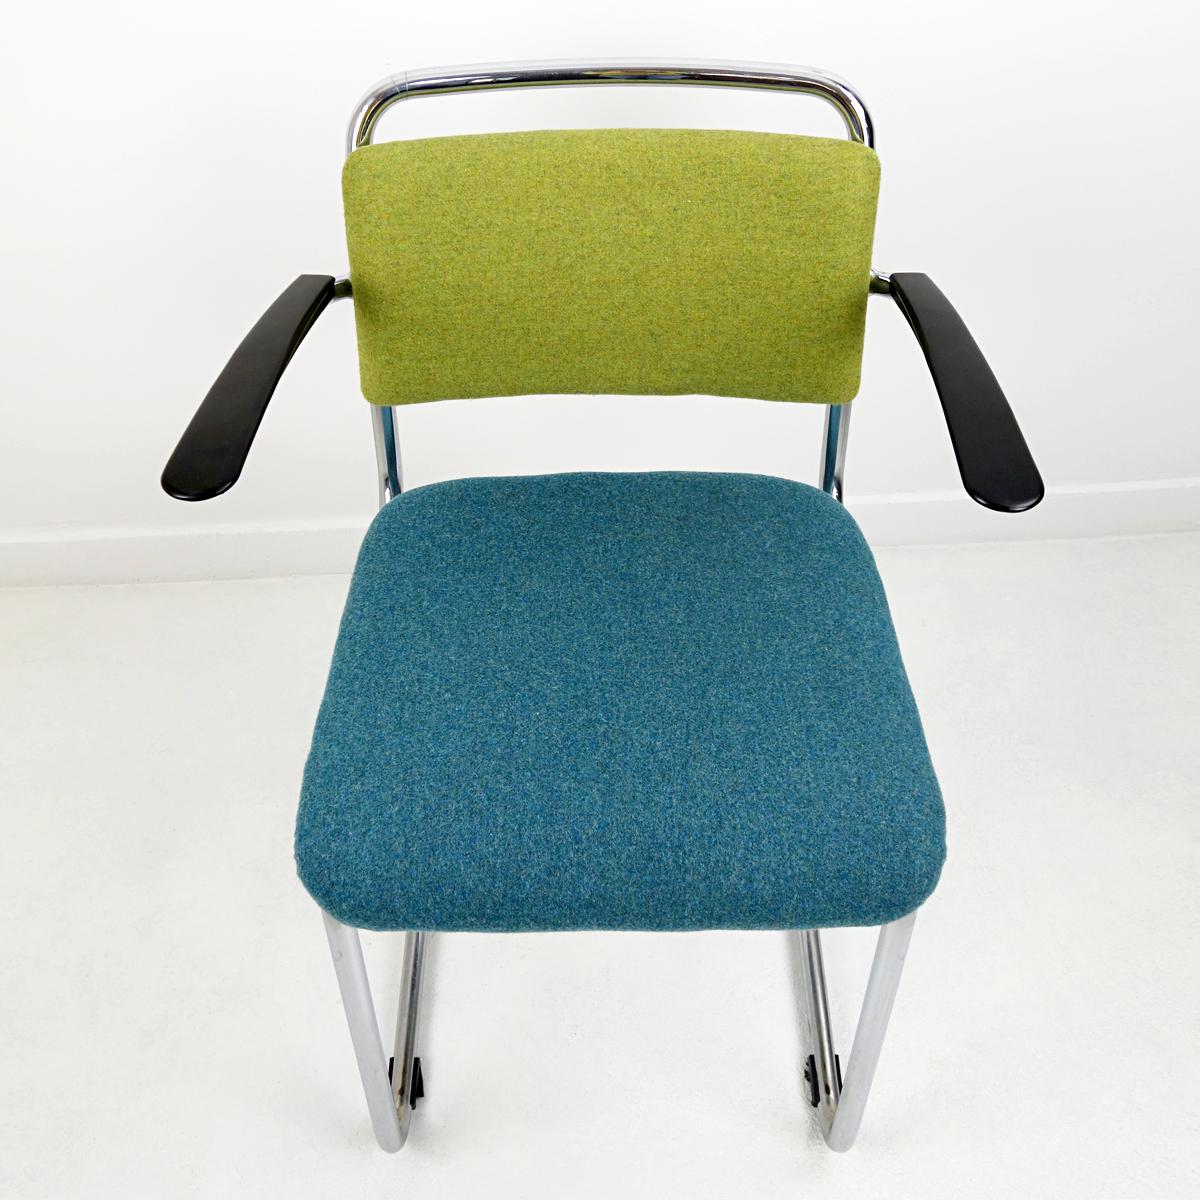 Mid-20th Century Steel Frame Chair Model 201 by Gispen in Bicolor Upholstery For Sale